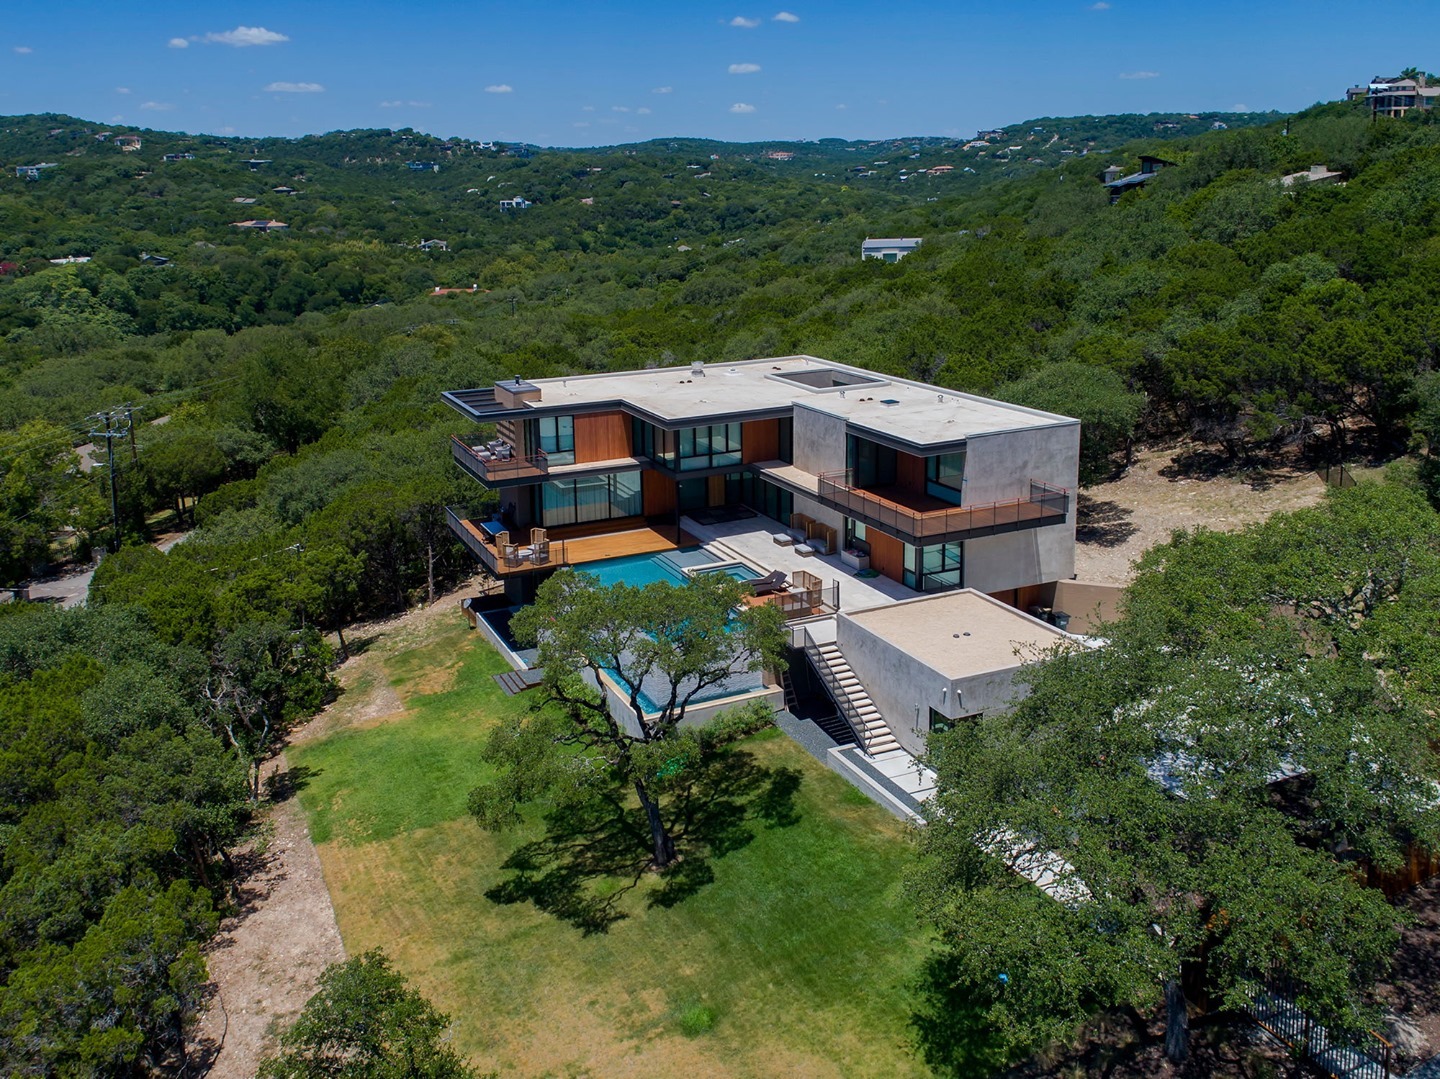 Hill country views with that gorgeous modern vibe.